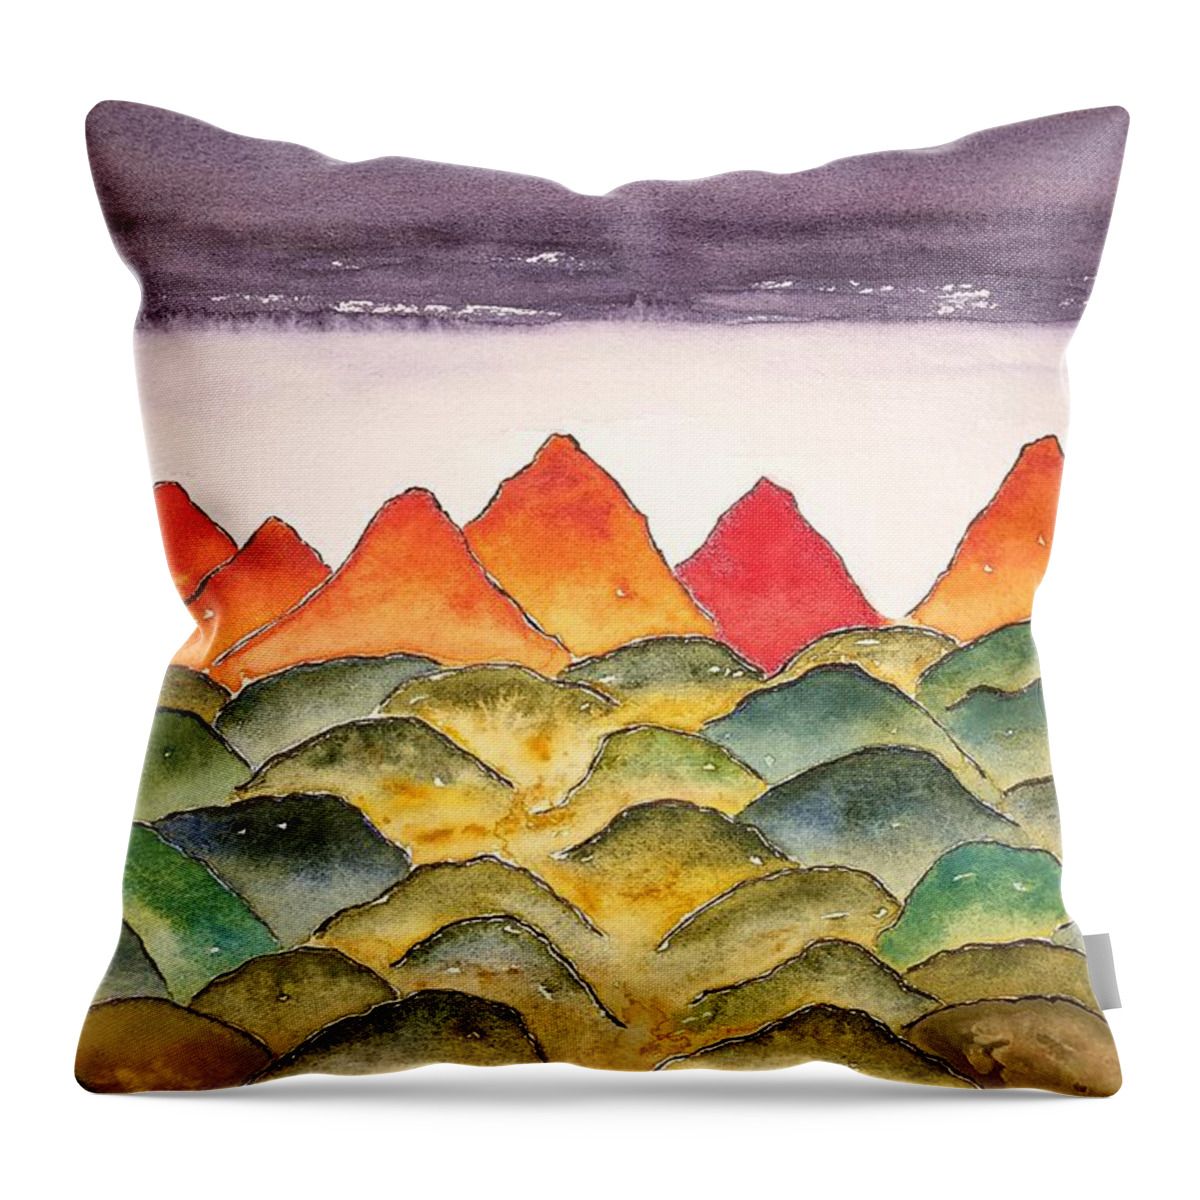 Watercolor Throw Pillow featuring the painting Planetscape Gamma by John Klobucher